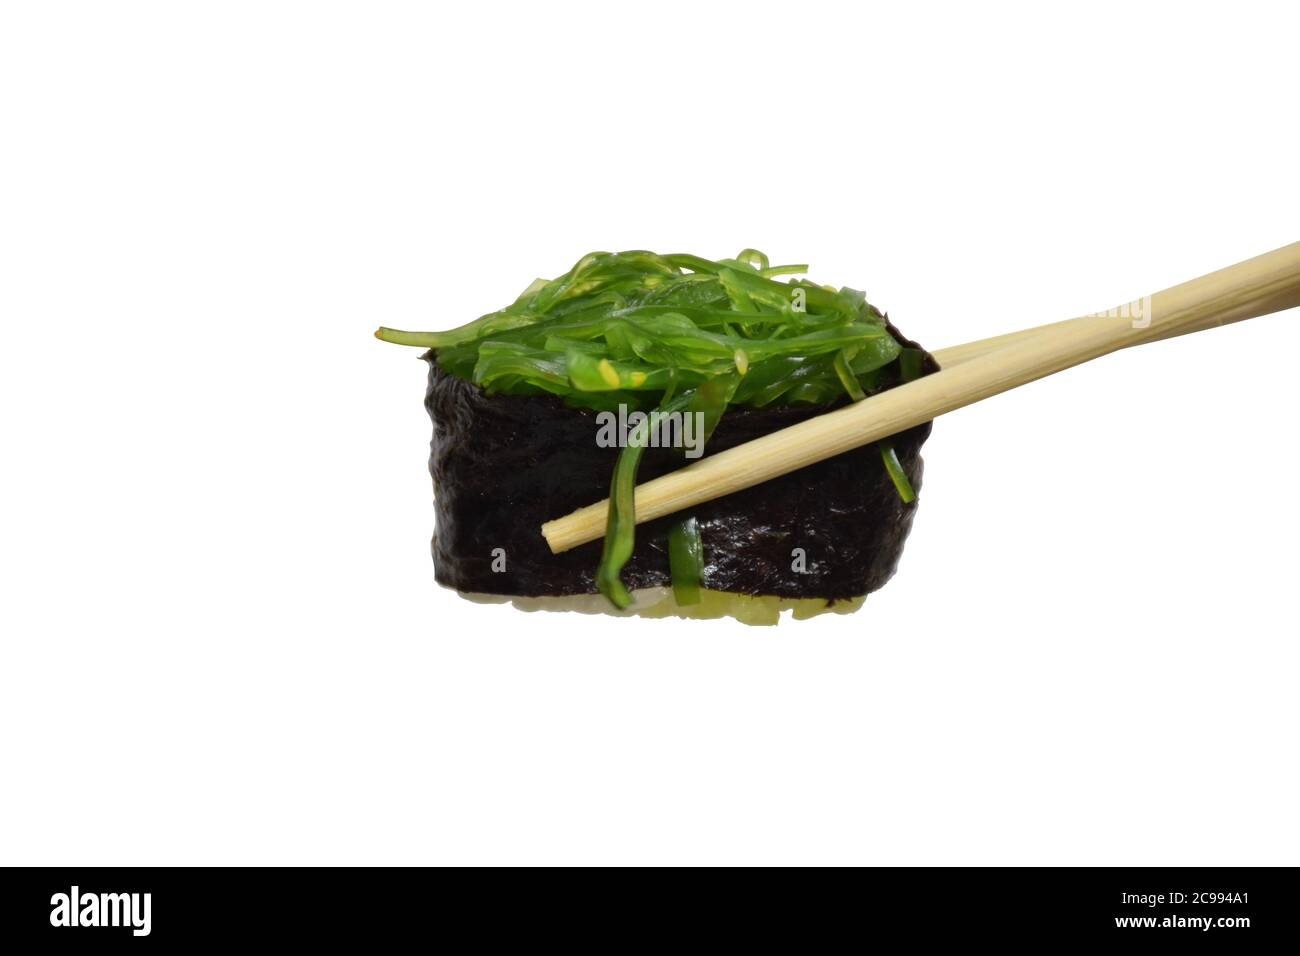 Edible seaweed or sea vegetables on wooden chopsticks isolated on white background with clipping path Stock Photo